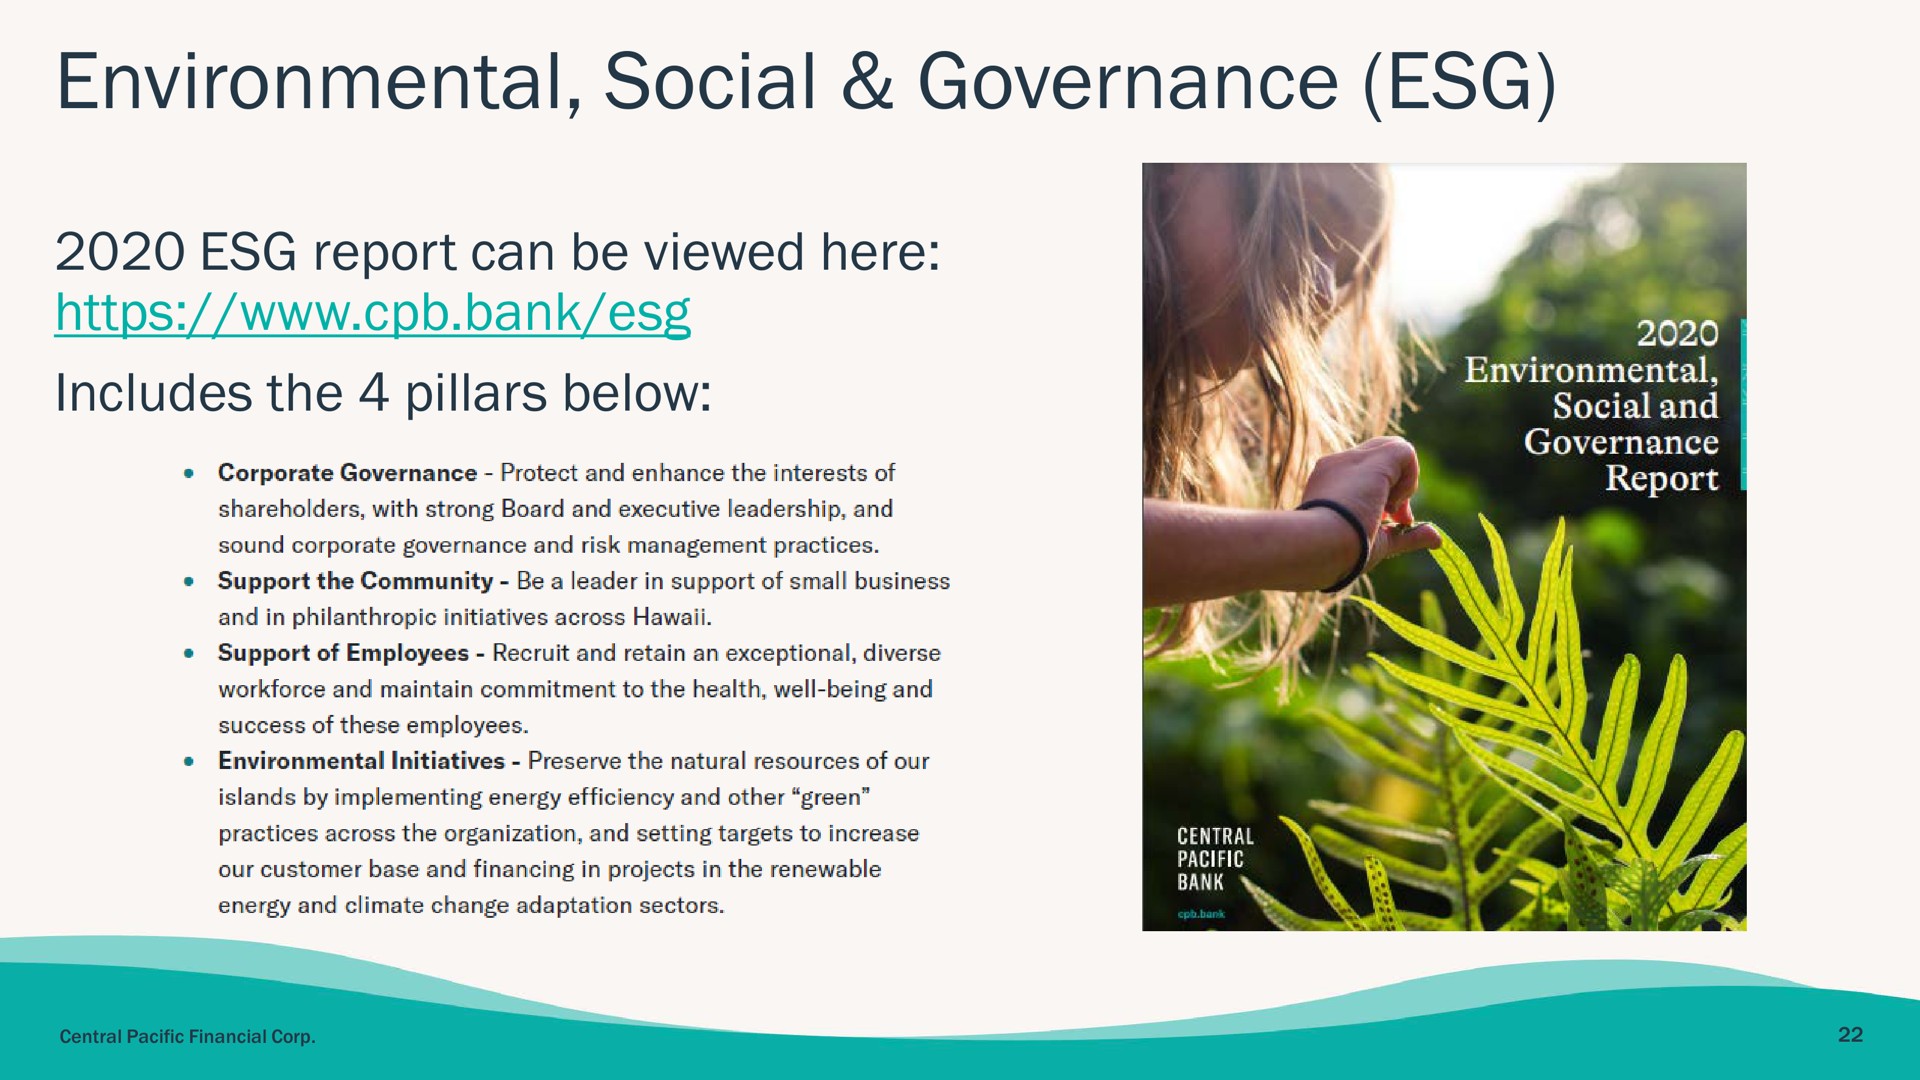 environmental social governance report can be viewed here includes the pillars below me ser sar | Central Pacific Financial